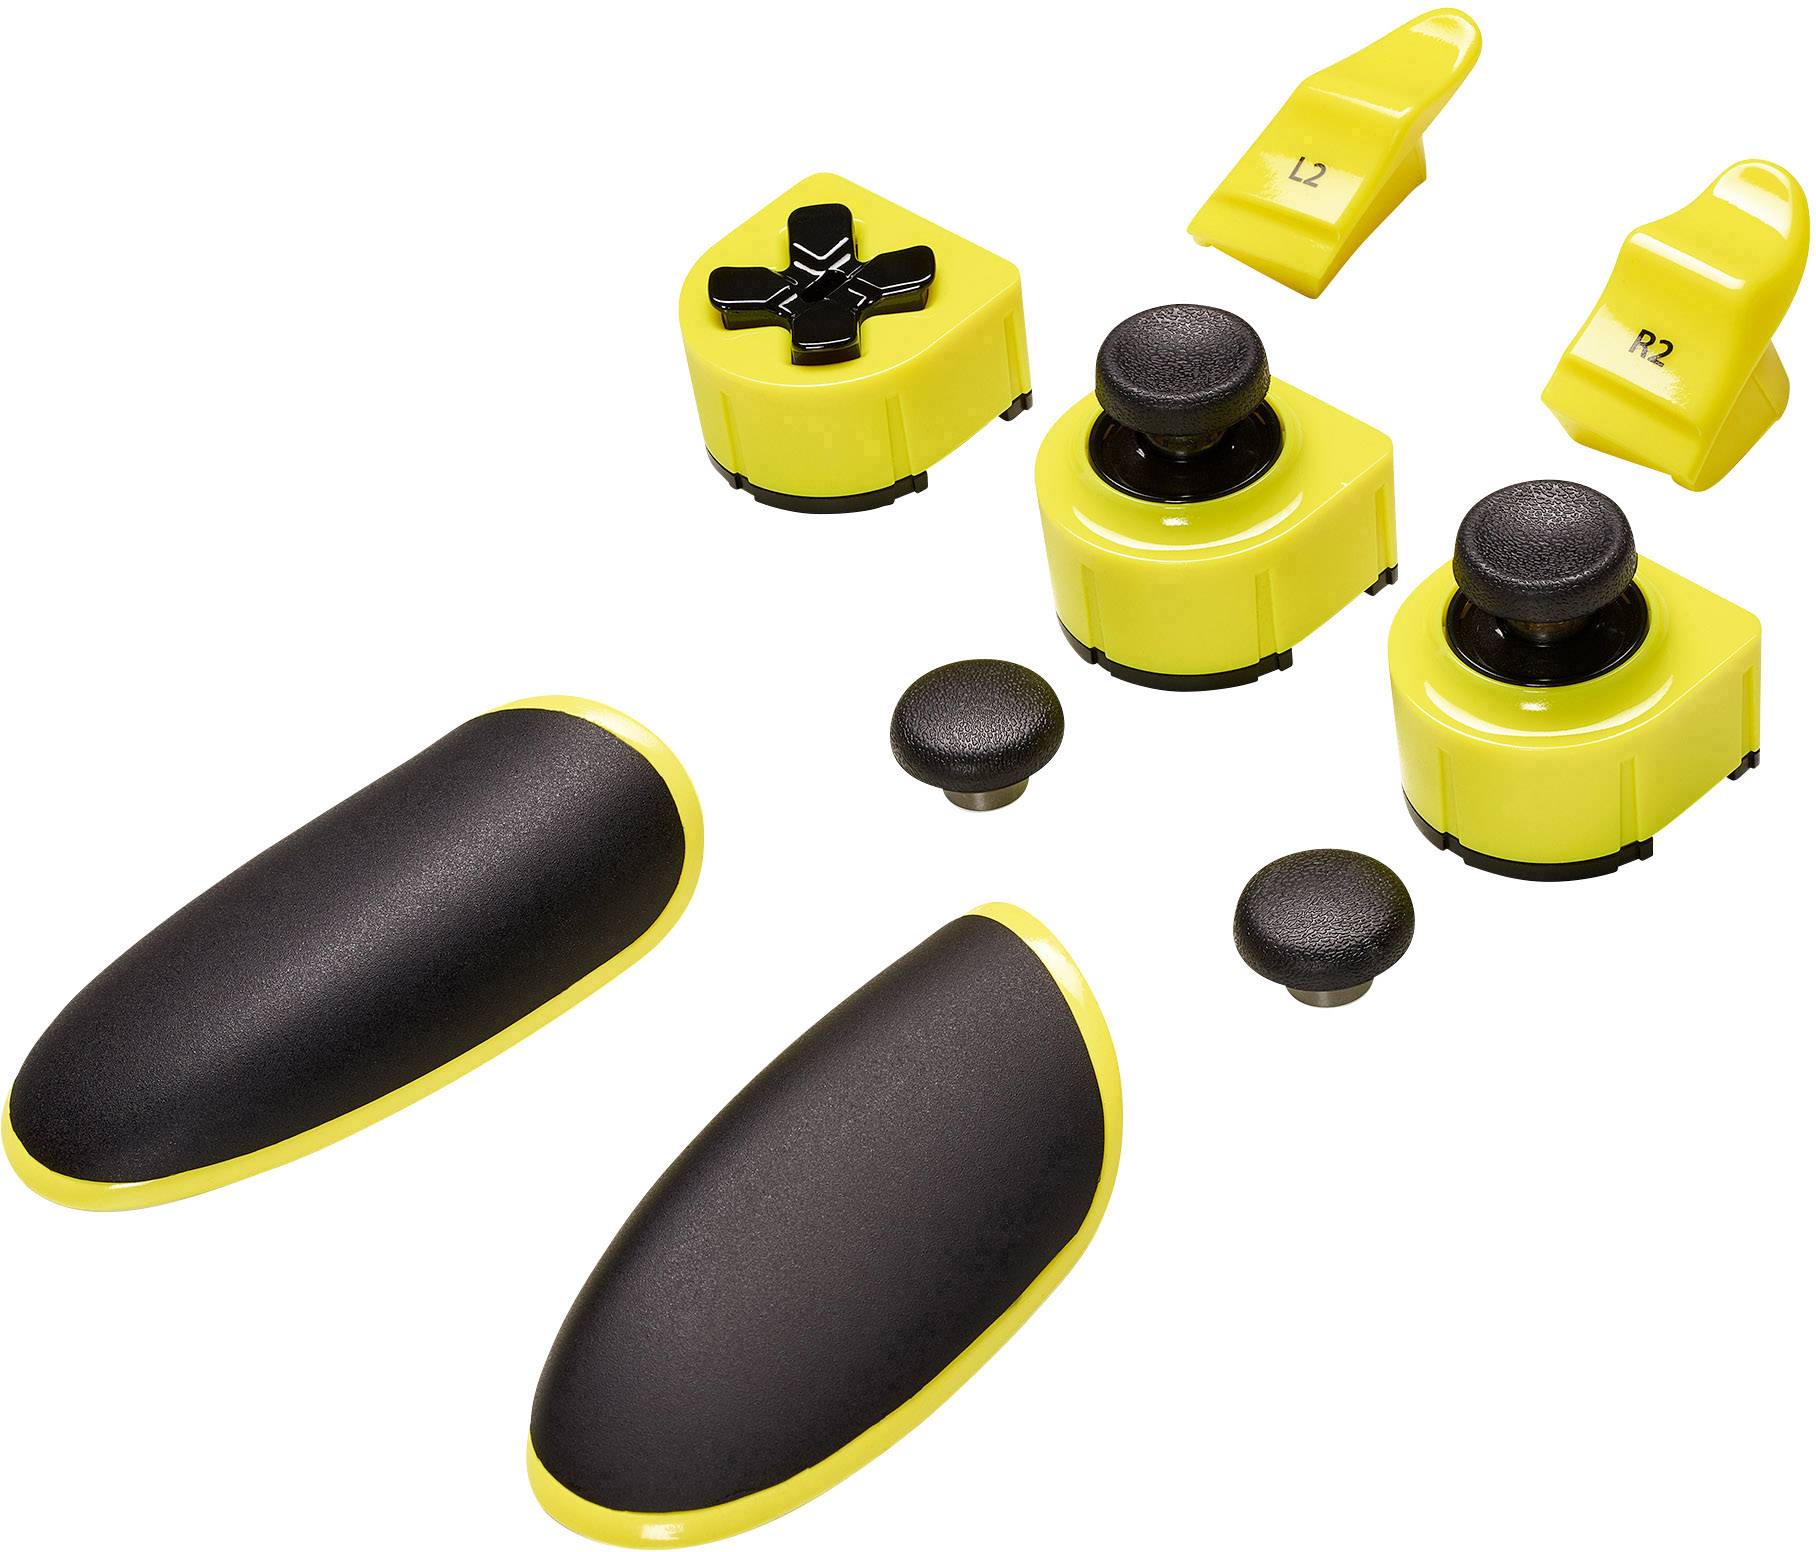 playstation controller yellow